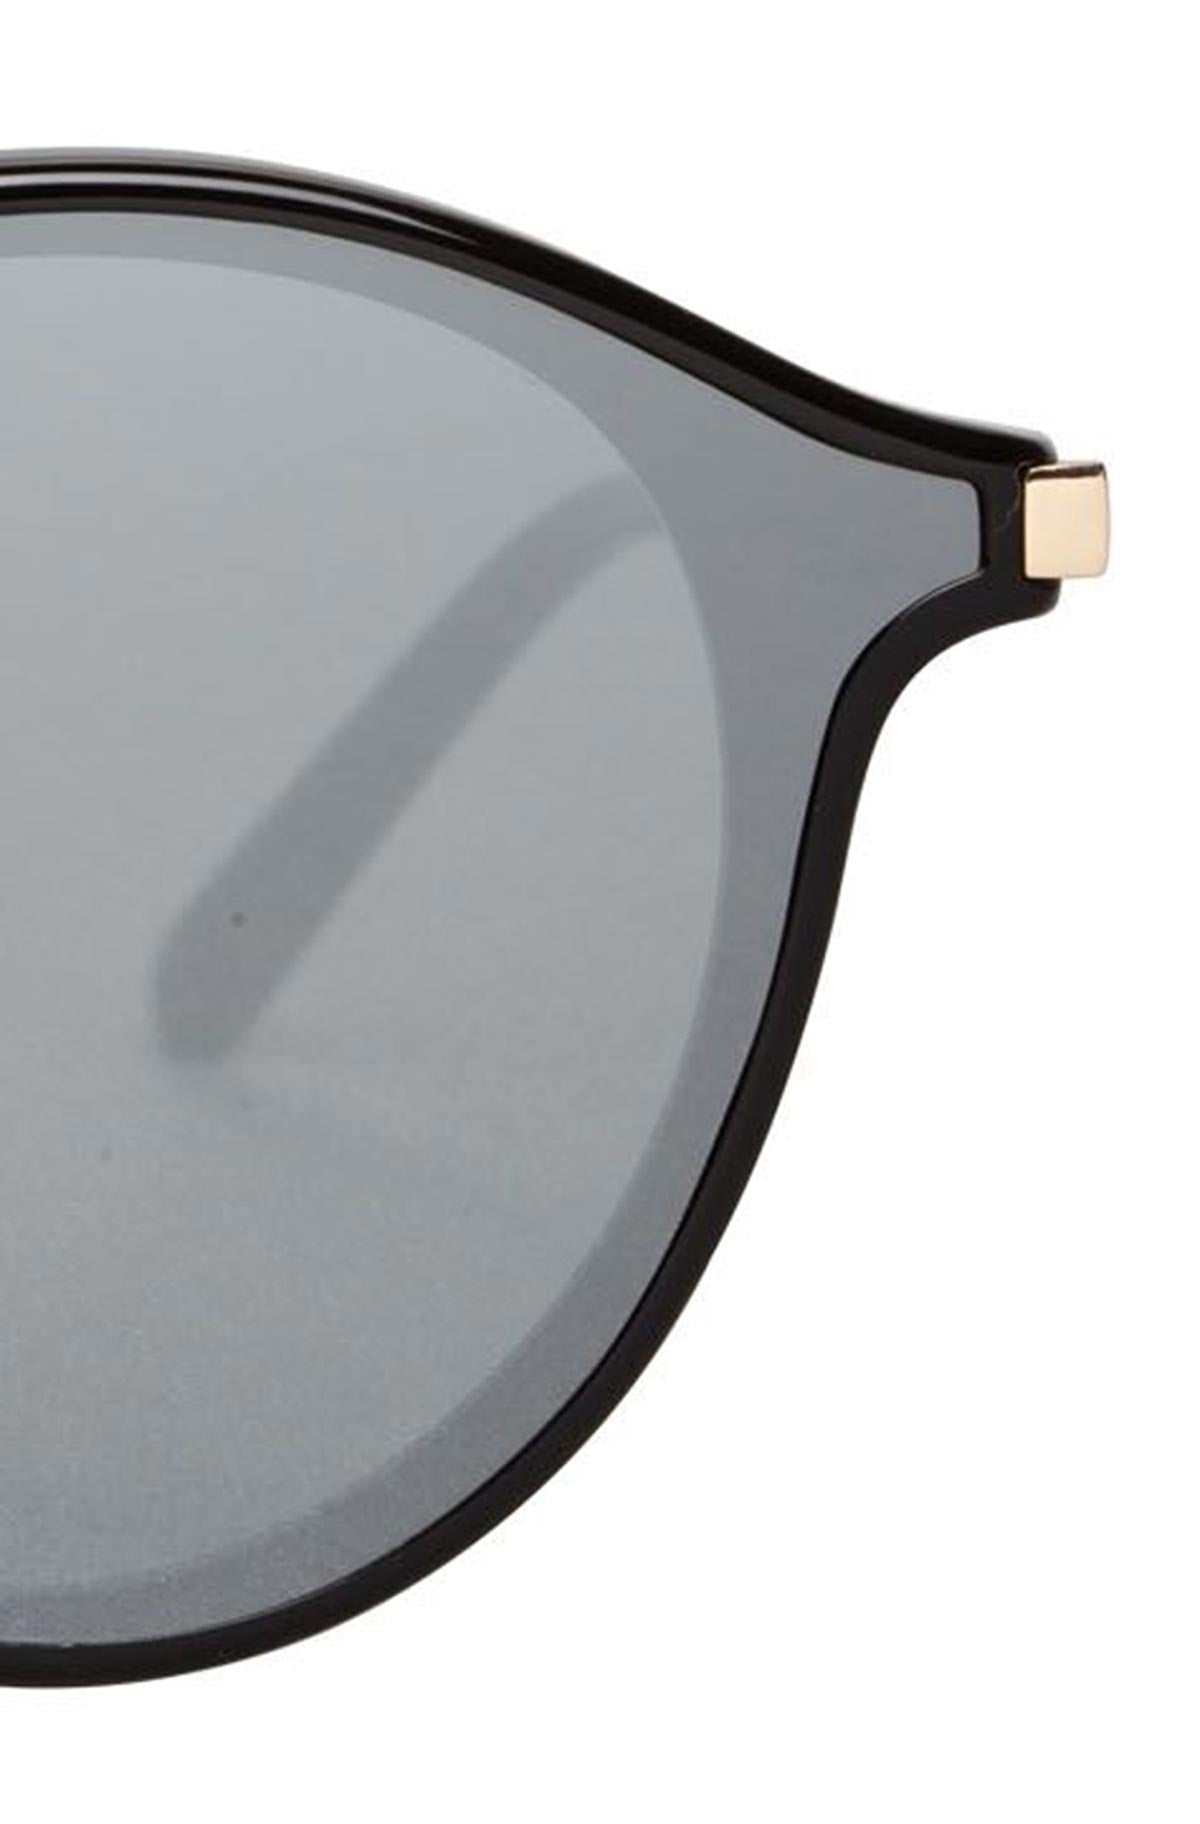   A pair of black SUMMIT sunglasses by Bonnie Clyde with gold frames. 